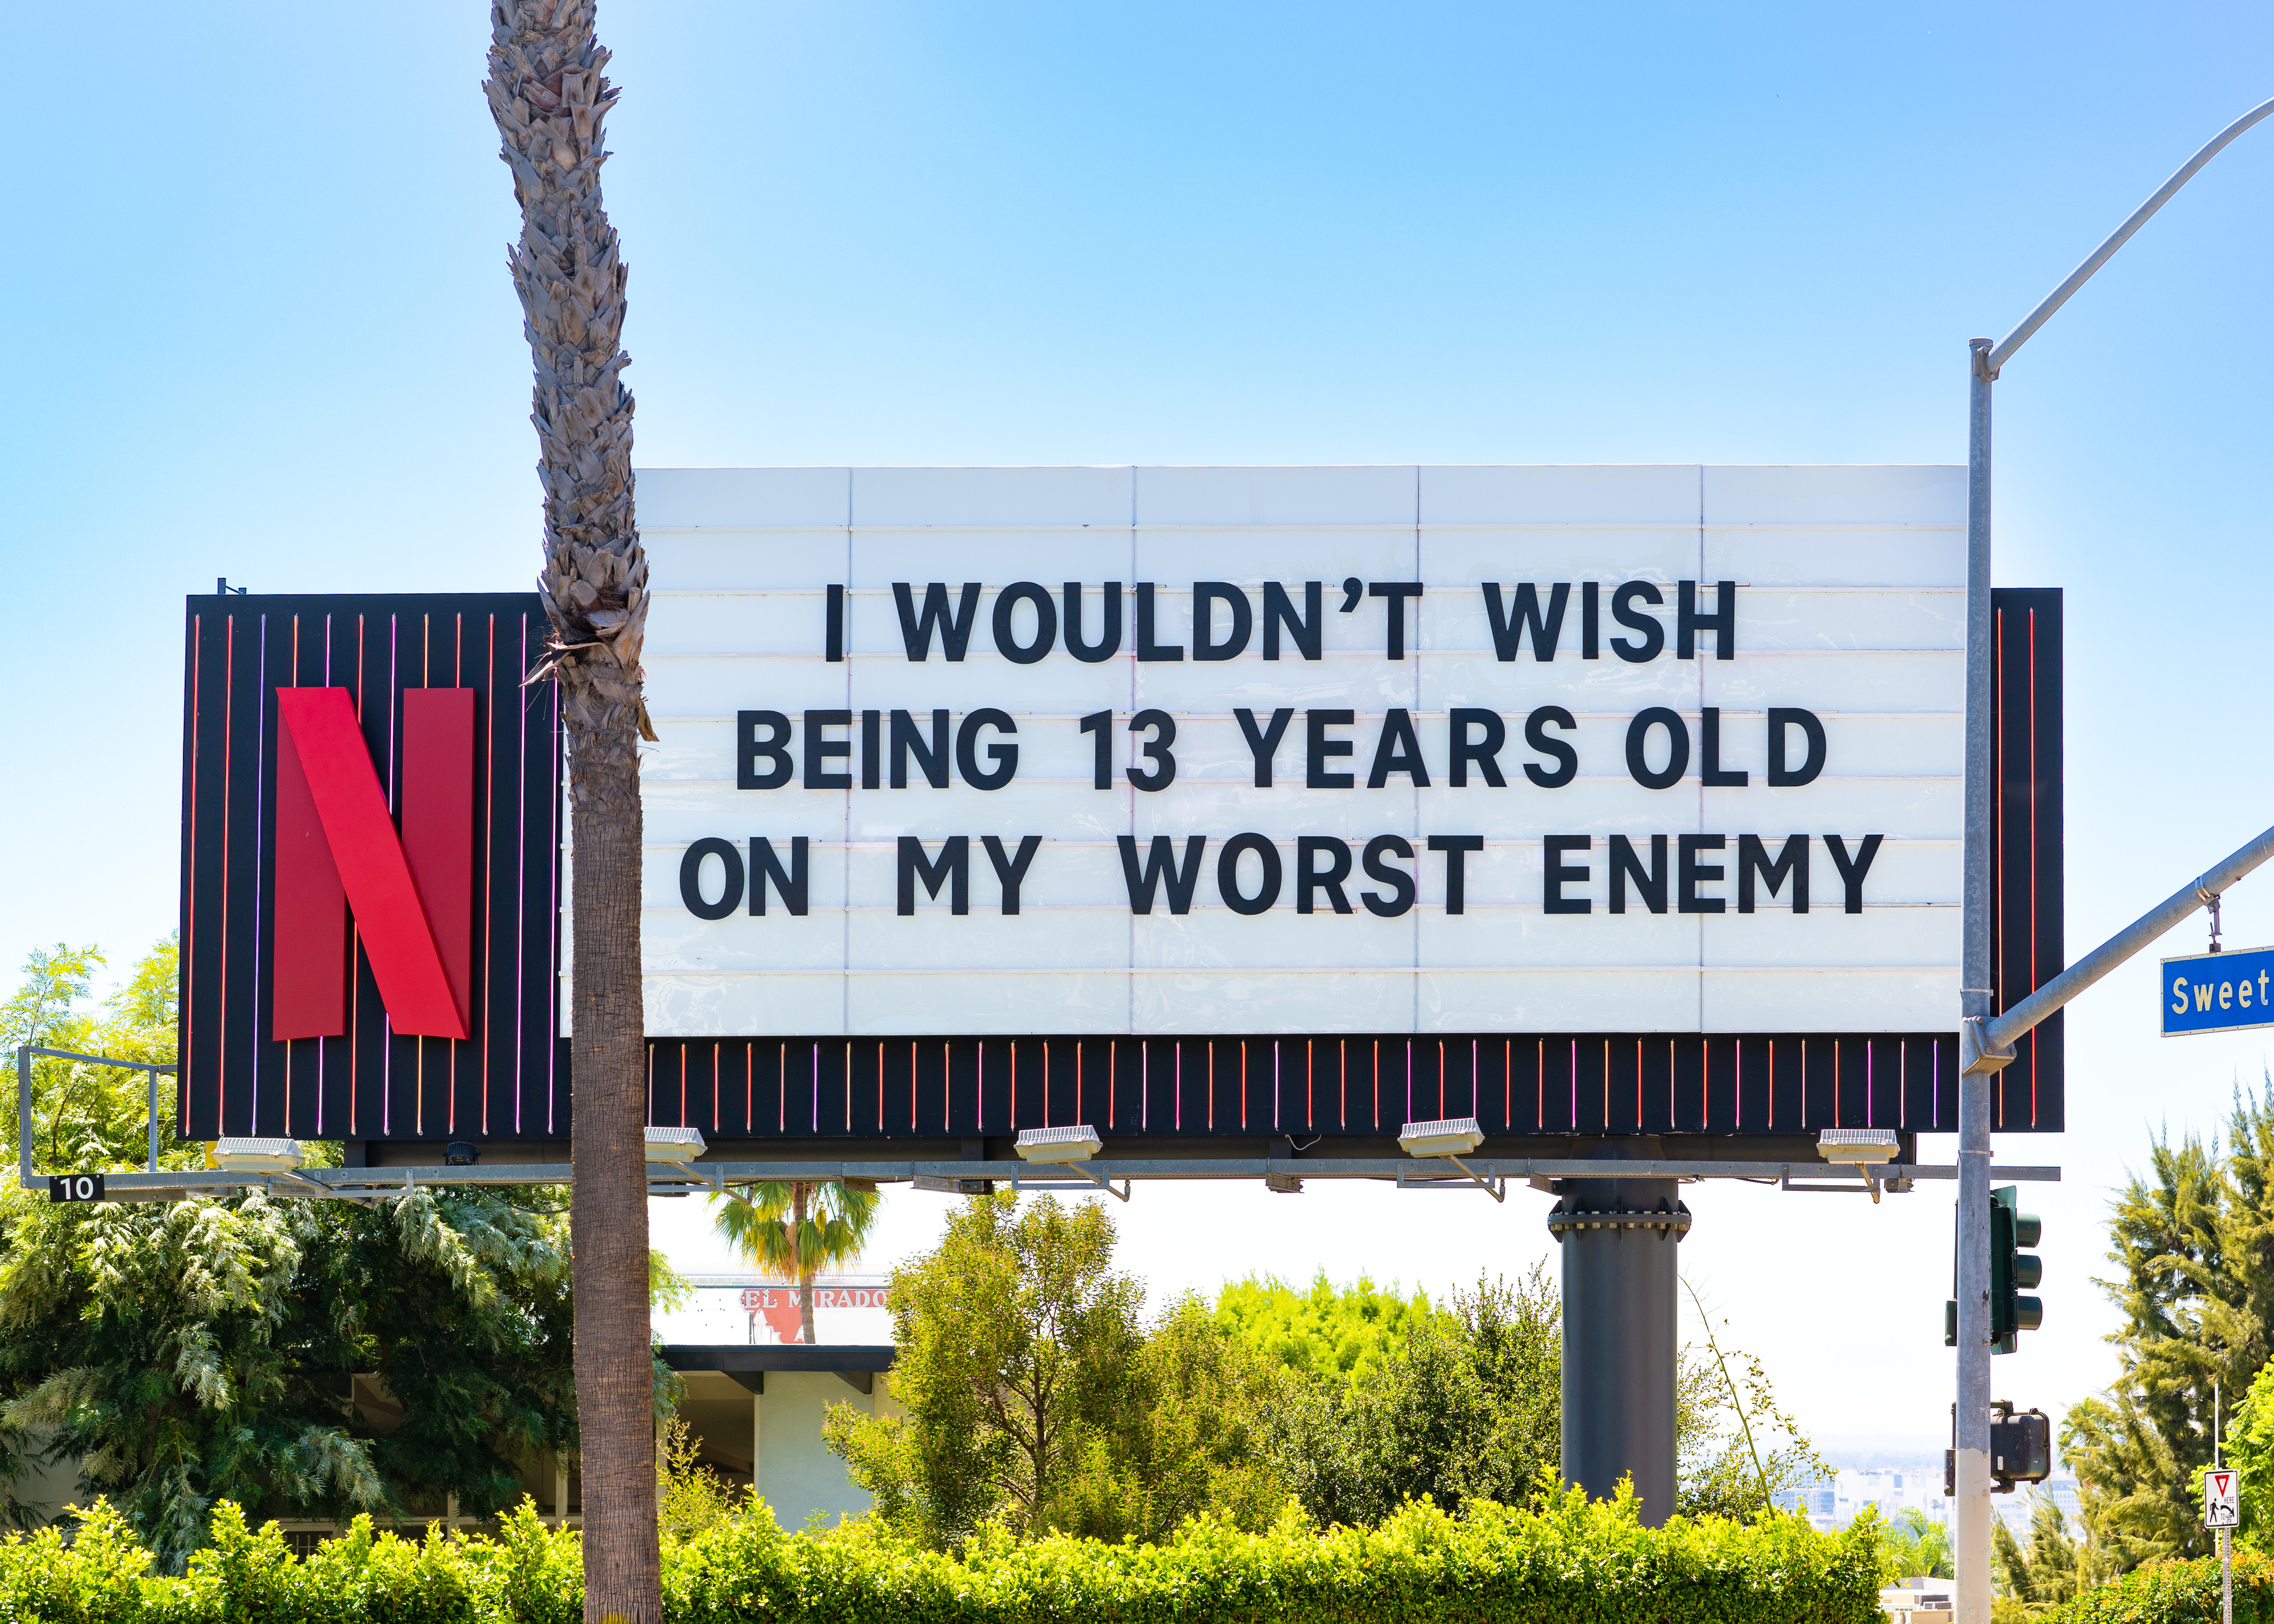 &quot;I wouldn&#x27;t wish being 13 years old on my worst enemy&quot;